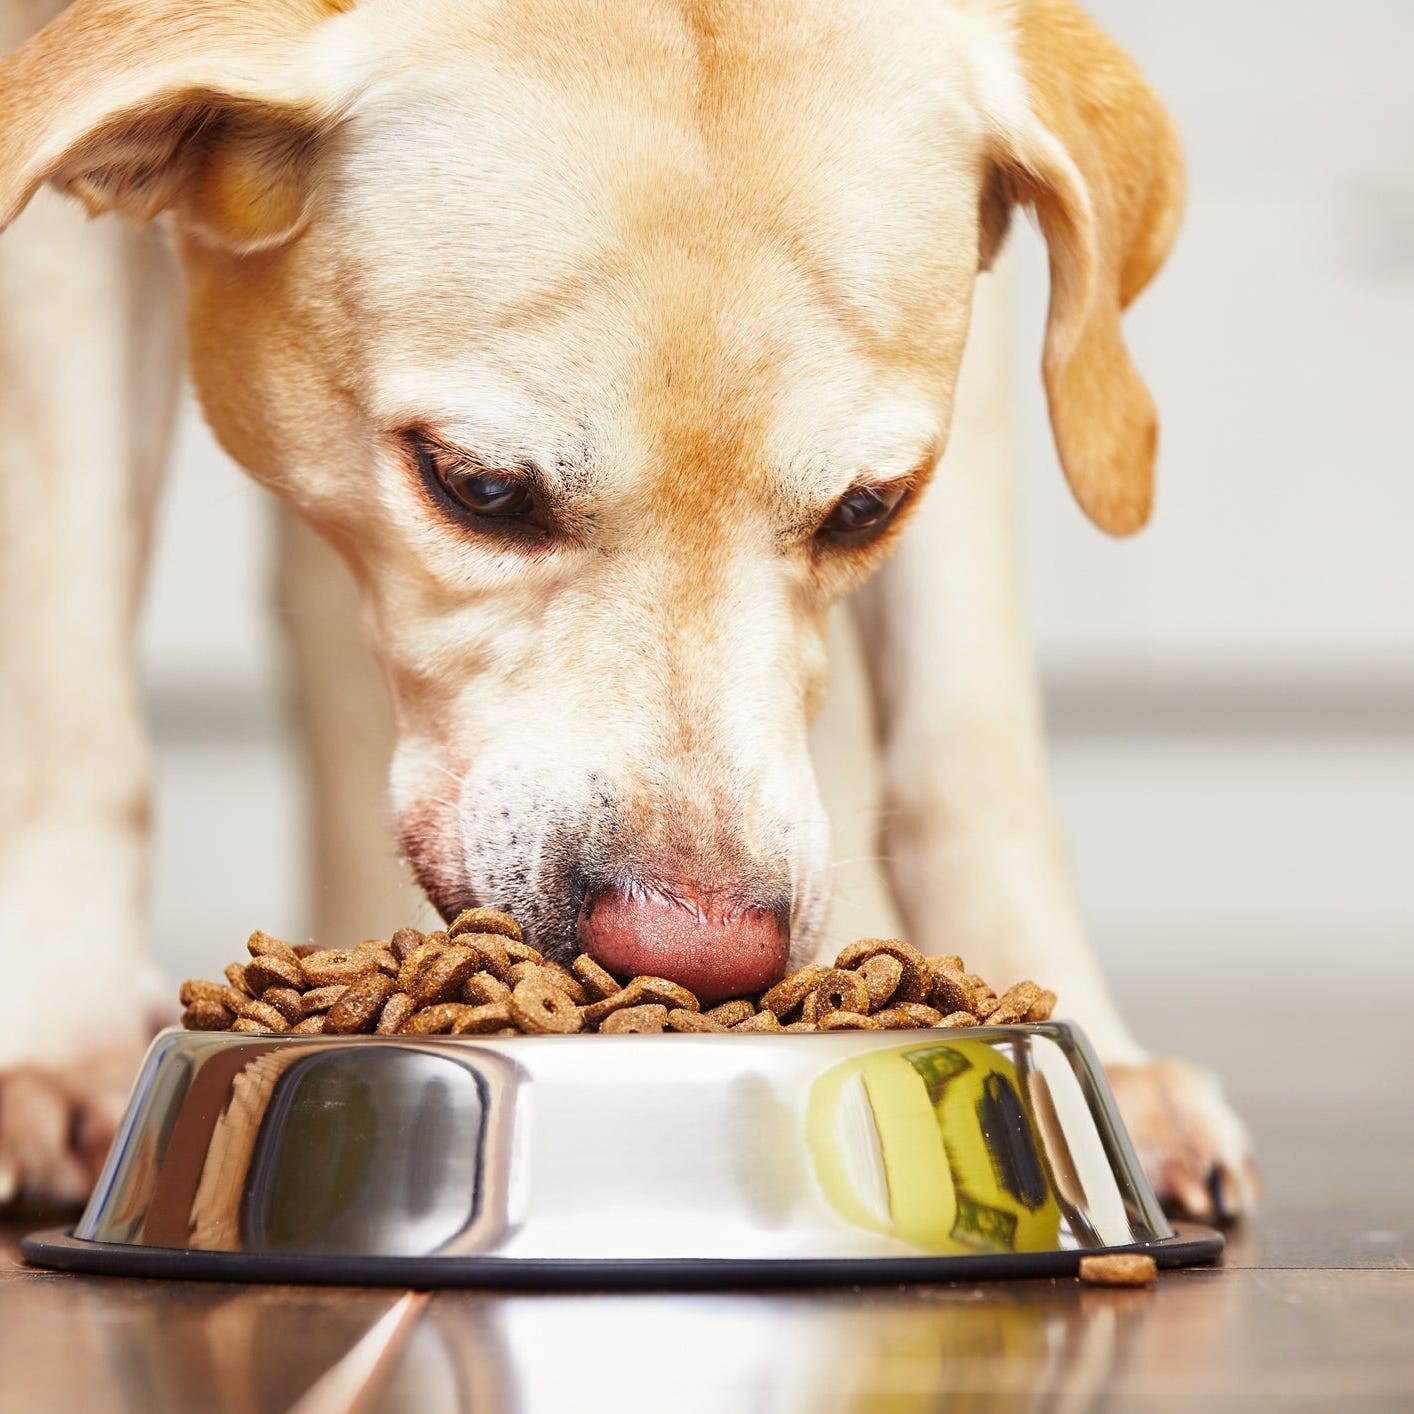 A dog is eating pet food in a bowl.